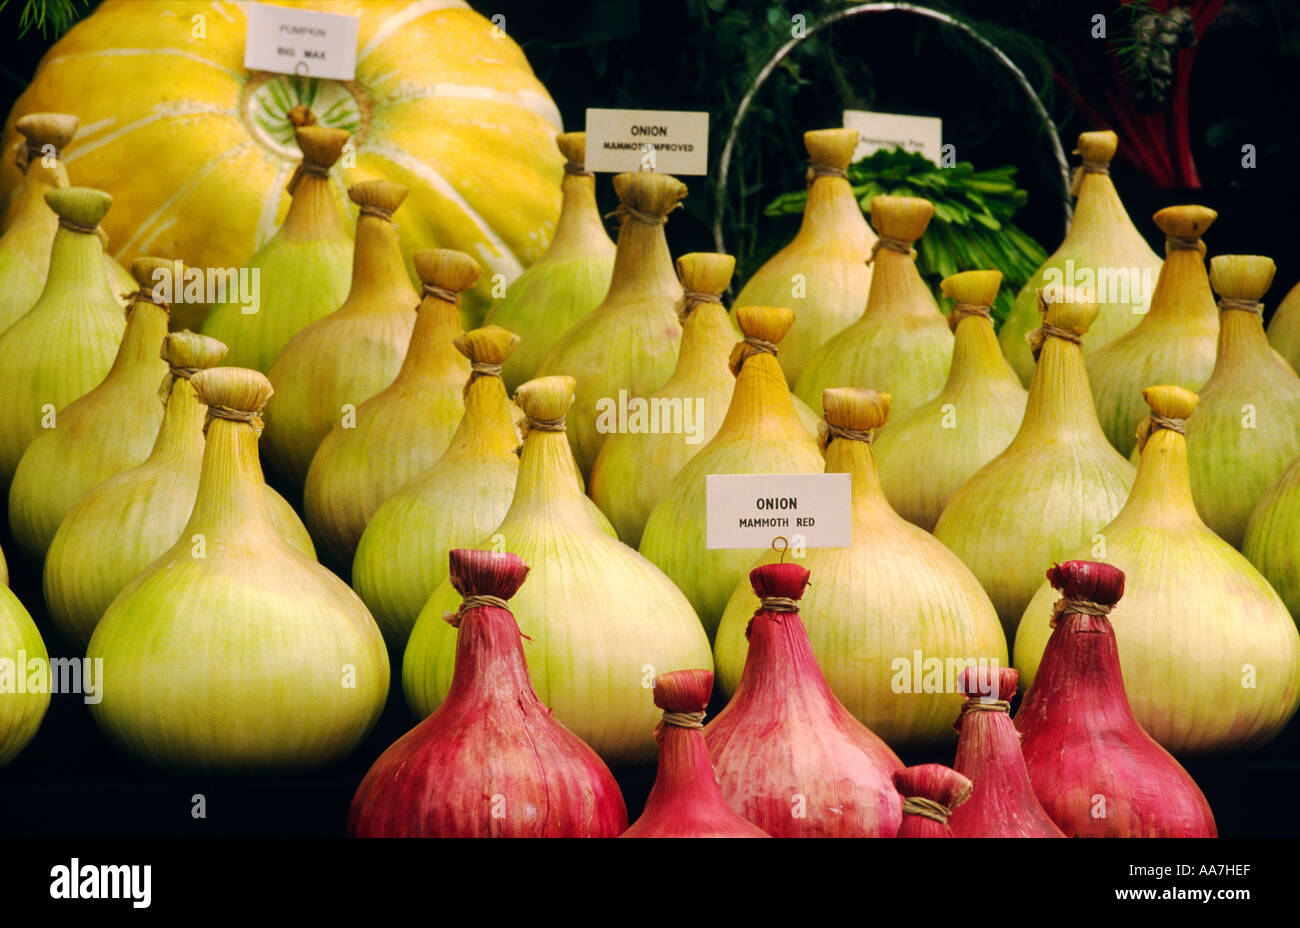 Home grown organic onions produce on display at the annual Flower Show in the market town of Shrewsbury, Shropshire, England. Stock Photo